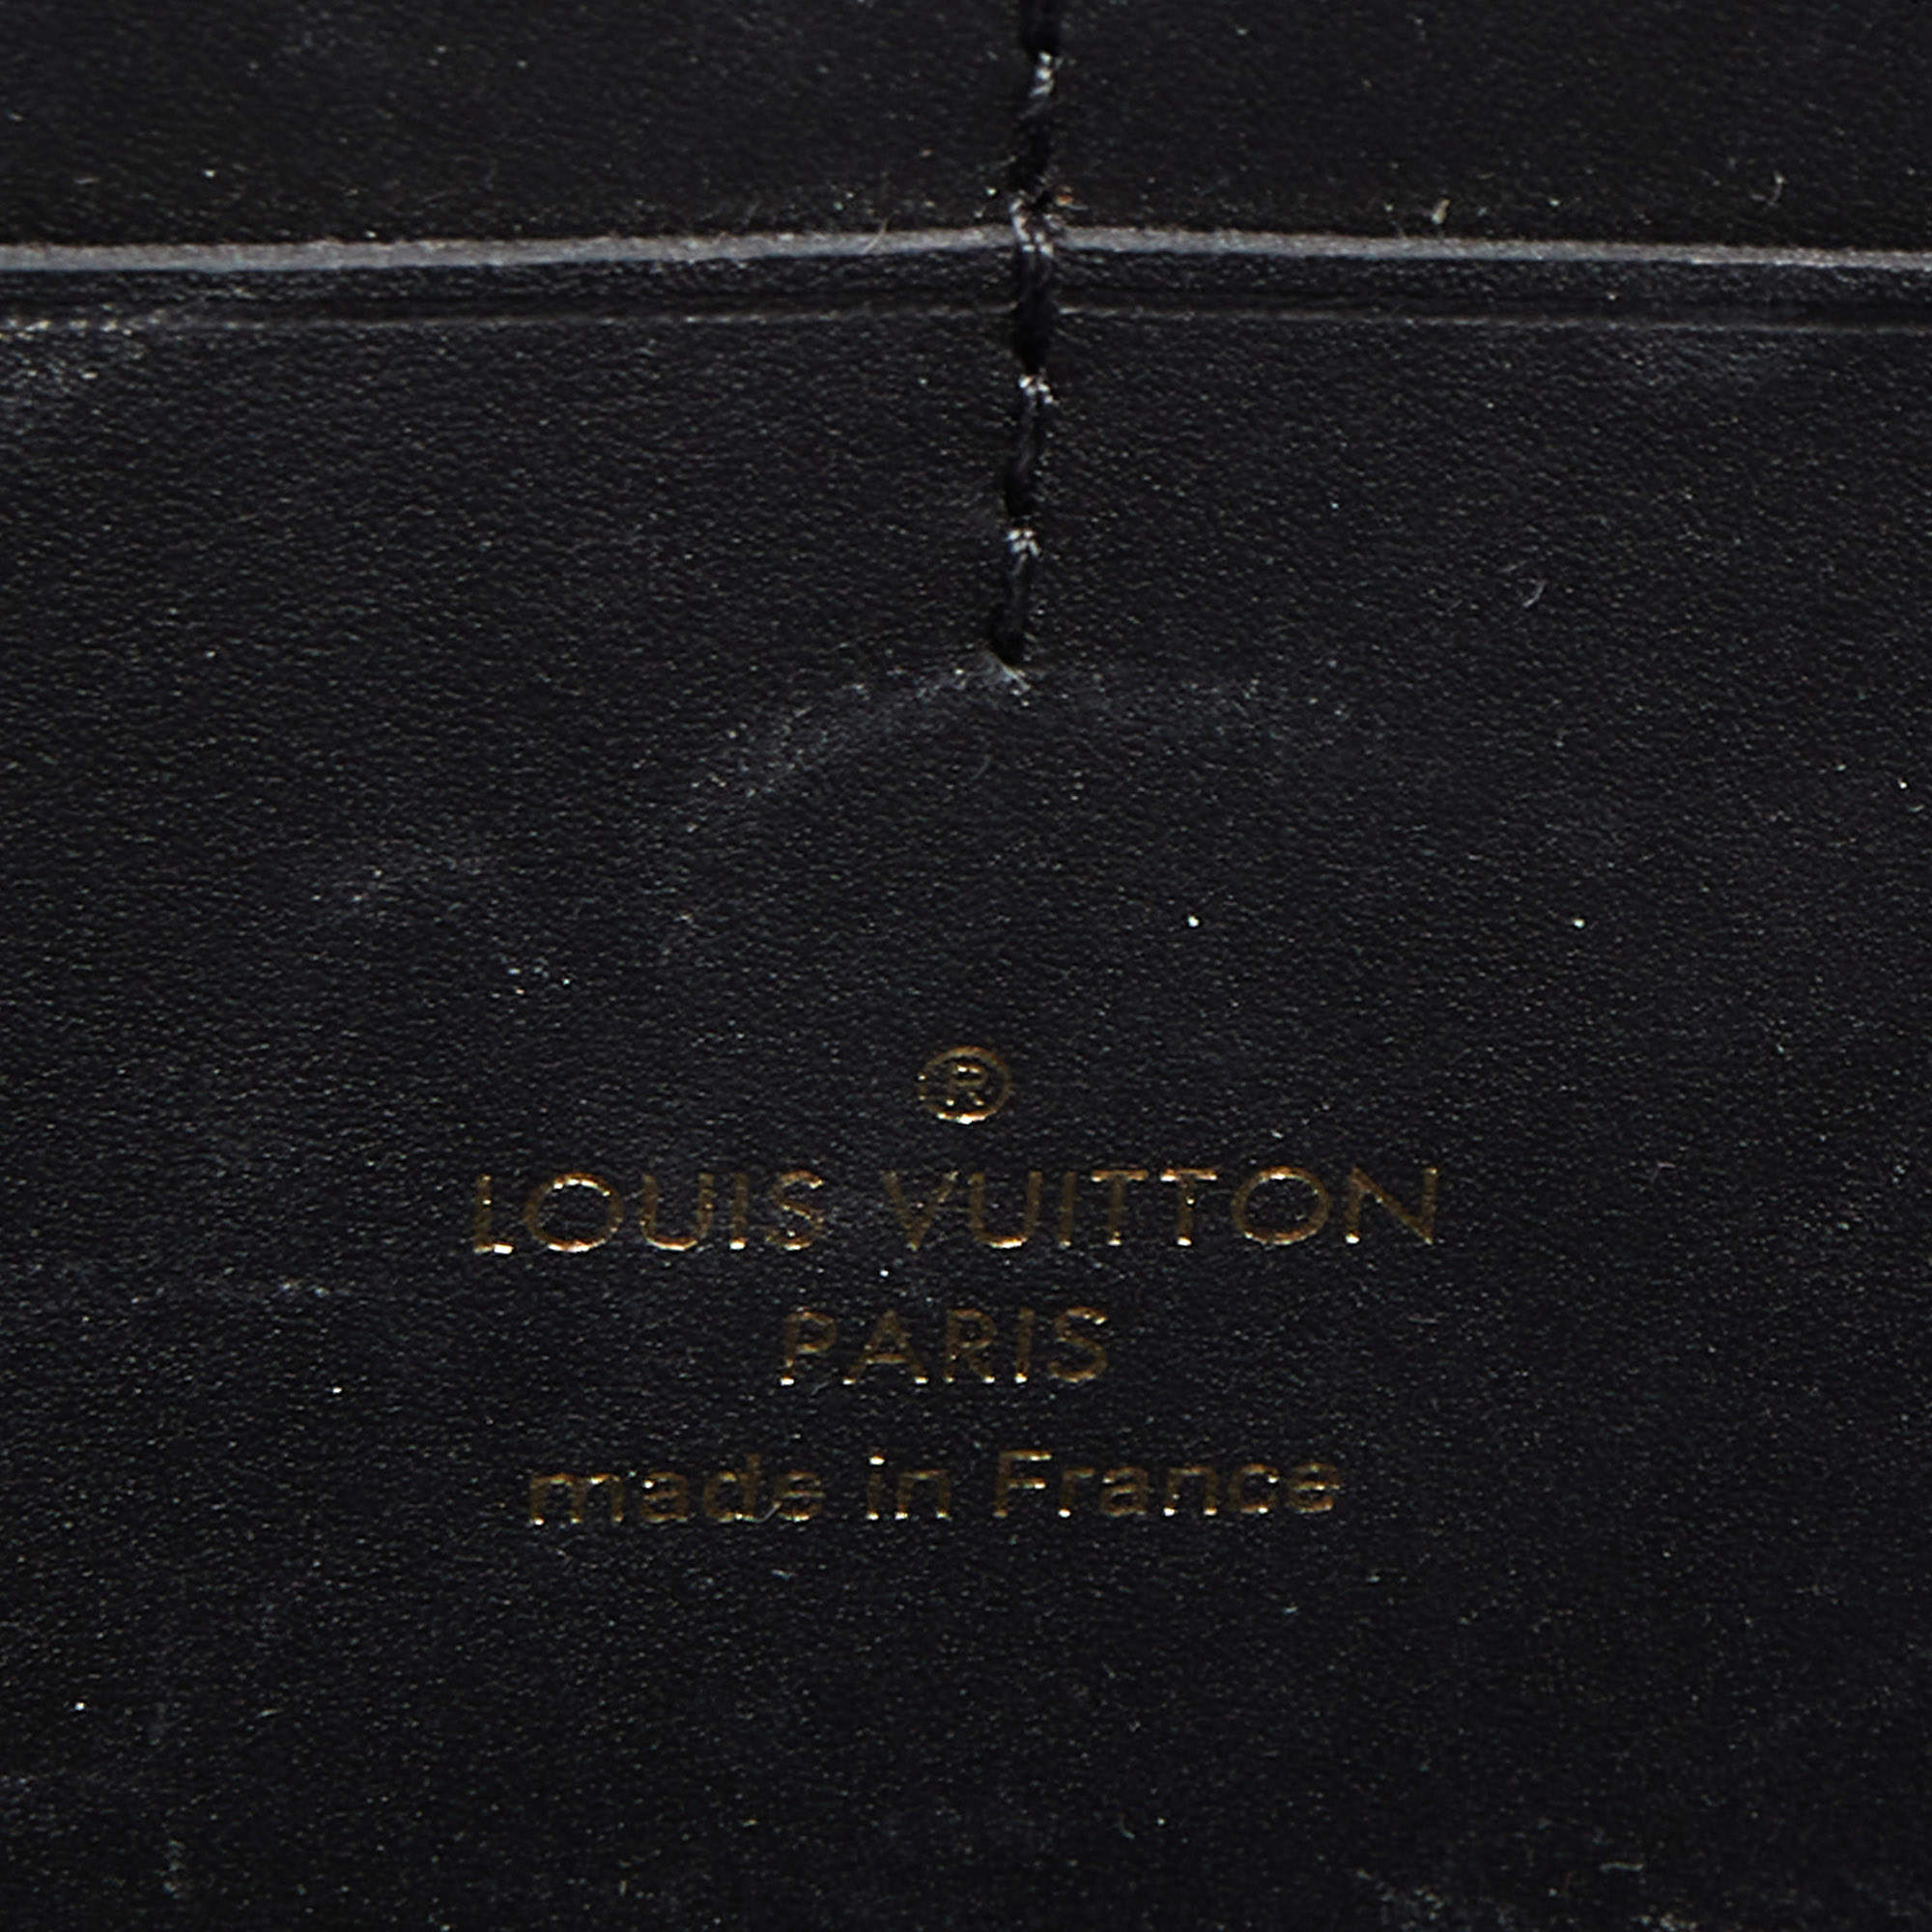 Monogram Dauphine Belt bag in Monogram & Reverse Monogram Coated Canvas  with a Calfskin trim and gold tone hardware and black microfibre lining. Louis  Vuitton. 2019., Handbags and Accessories Online